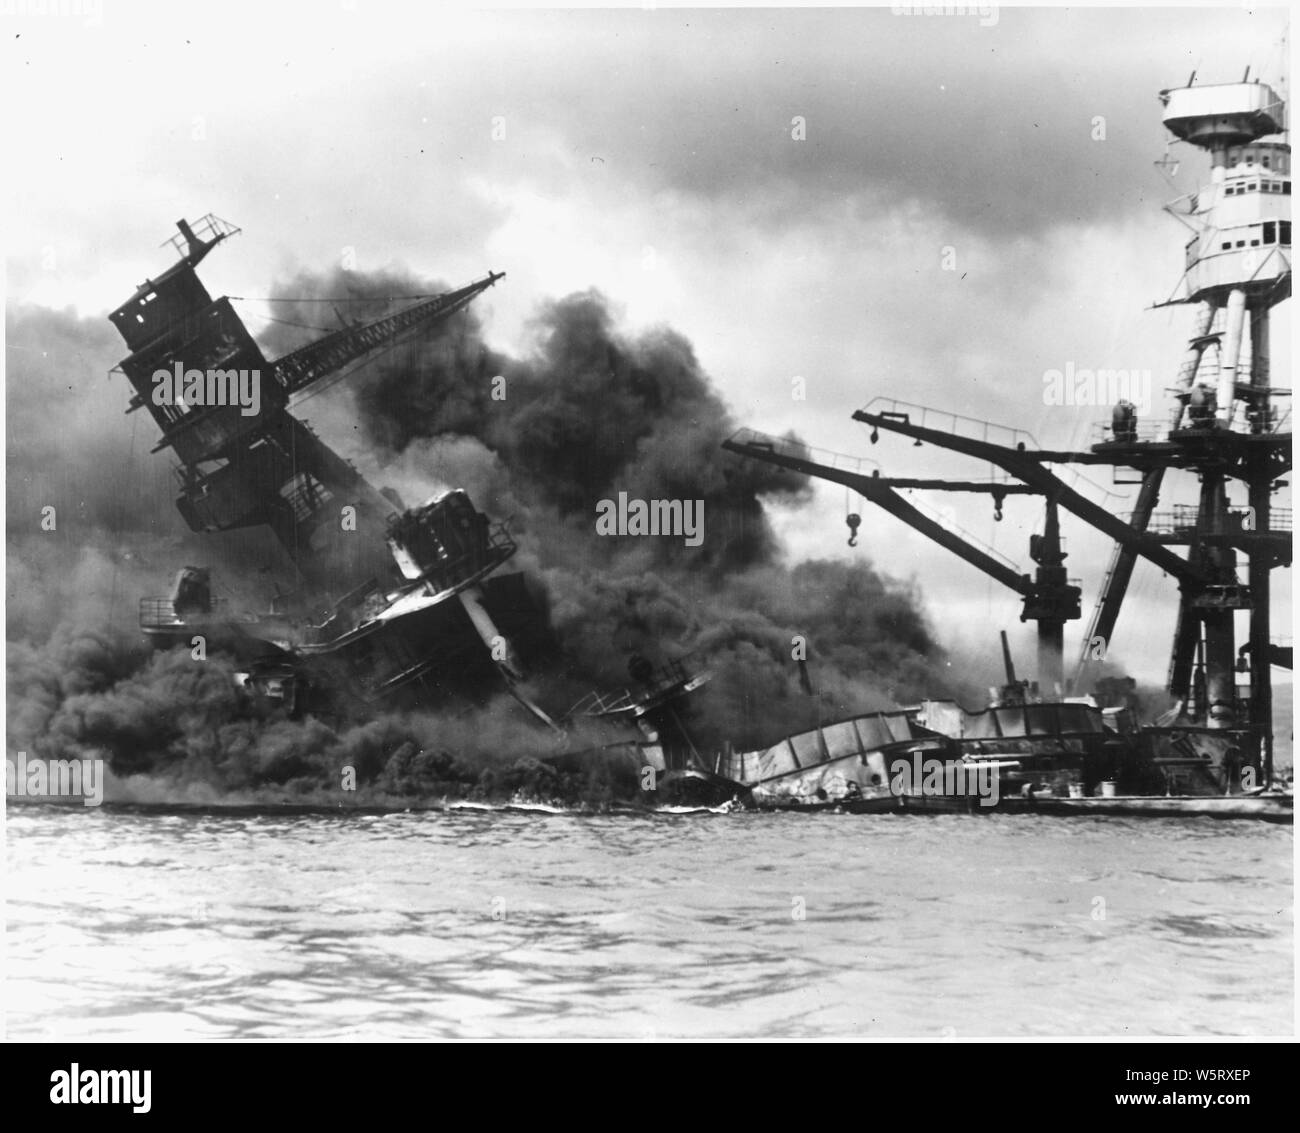 Naval photograph documenting the Japanese attack on Pearl Harbor, Hawaii which initiated US participation in World War II. Navy's caption: The battleship USS ARIZONA sinking after being hit by Japanese air attack on Dec. 7,1941.; Scope and content:  This photograph was originally taken by a Naval photographer immediately after the Japanese attack on Pearl Harbor, but came to be filed in a writ of application for habeas corpus case (number 298) tried in the US District Court, District of Hawaii in 1944. The case, In Re Lloyd C. Duncan related to imposition of martial law in Hawaii during World Stock Photo